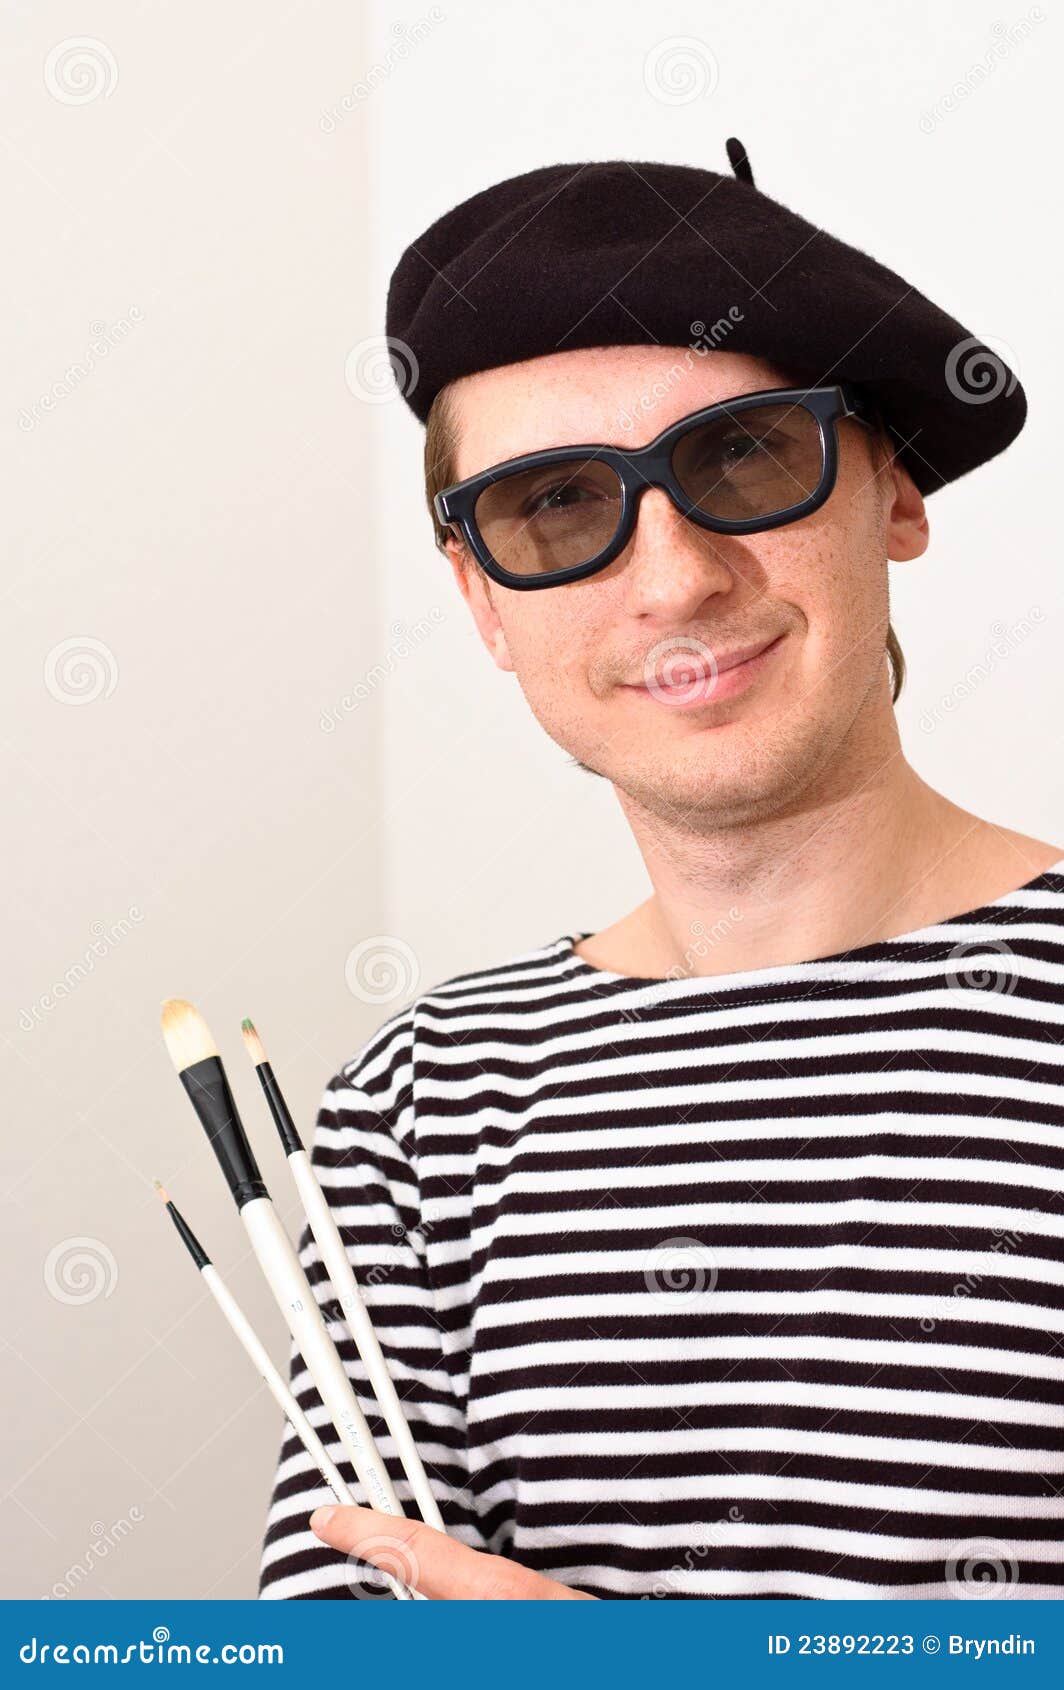 The Artist With Beret And Brushes Stock Image Image of